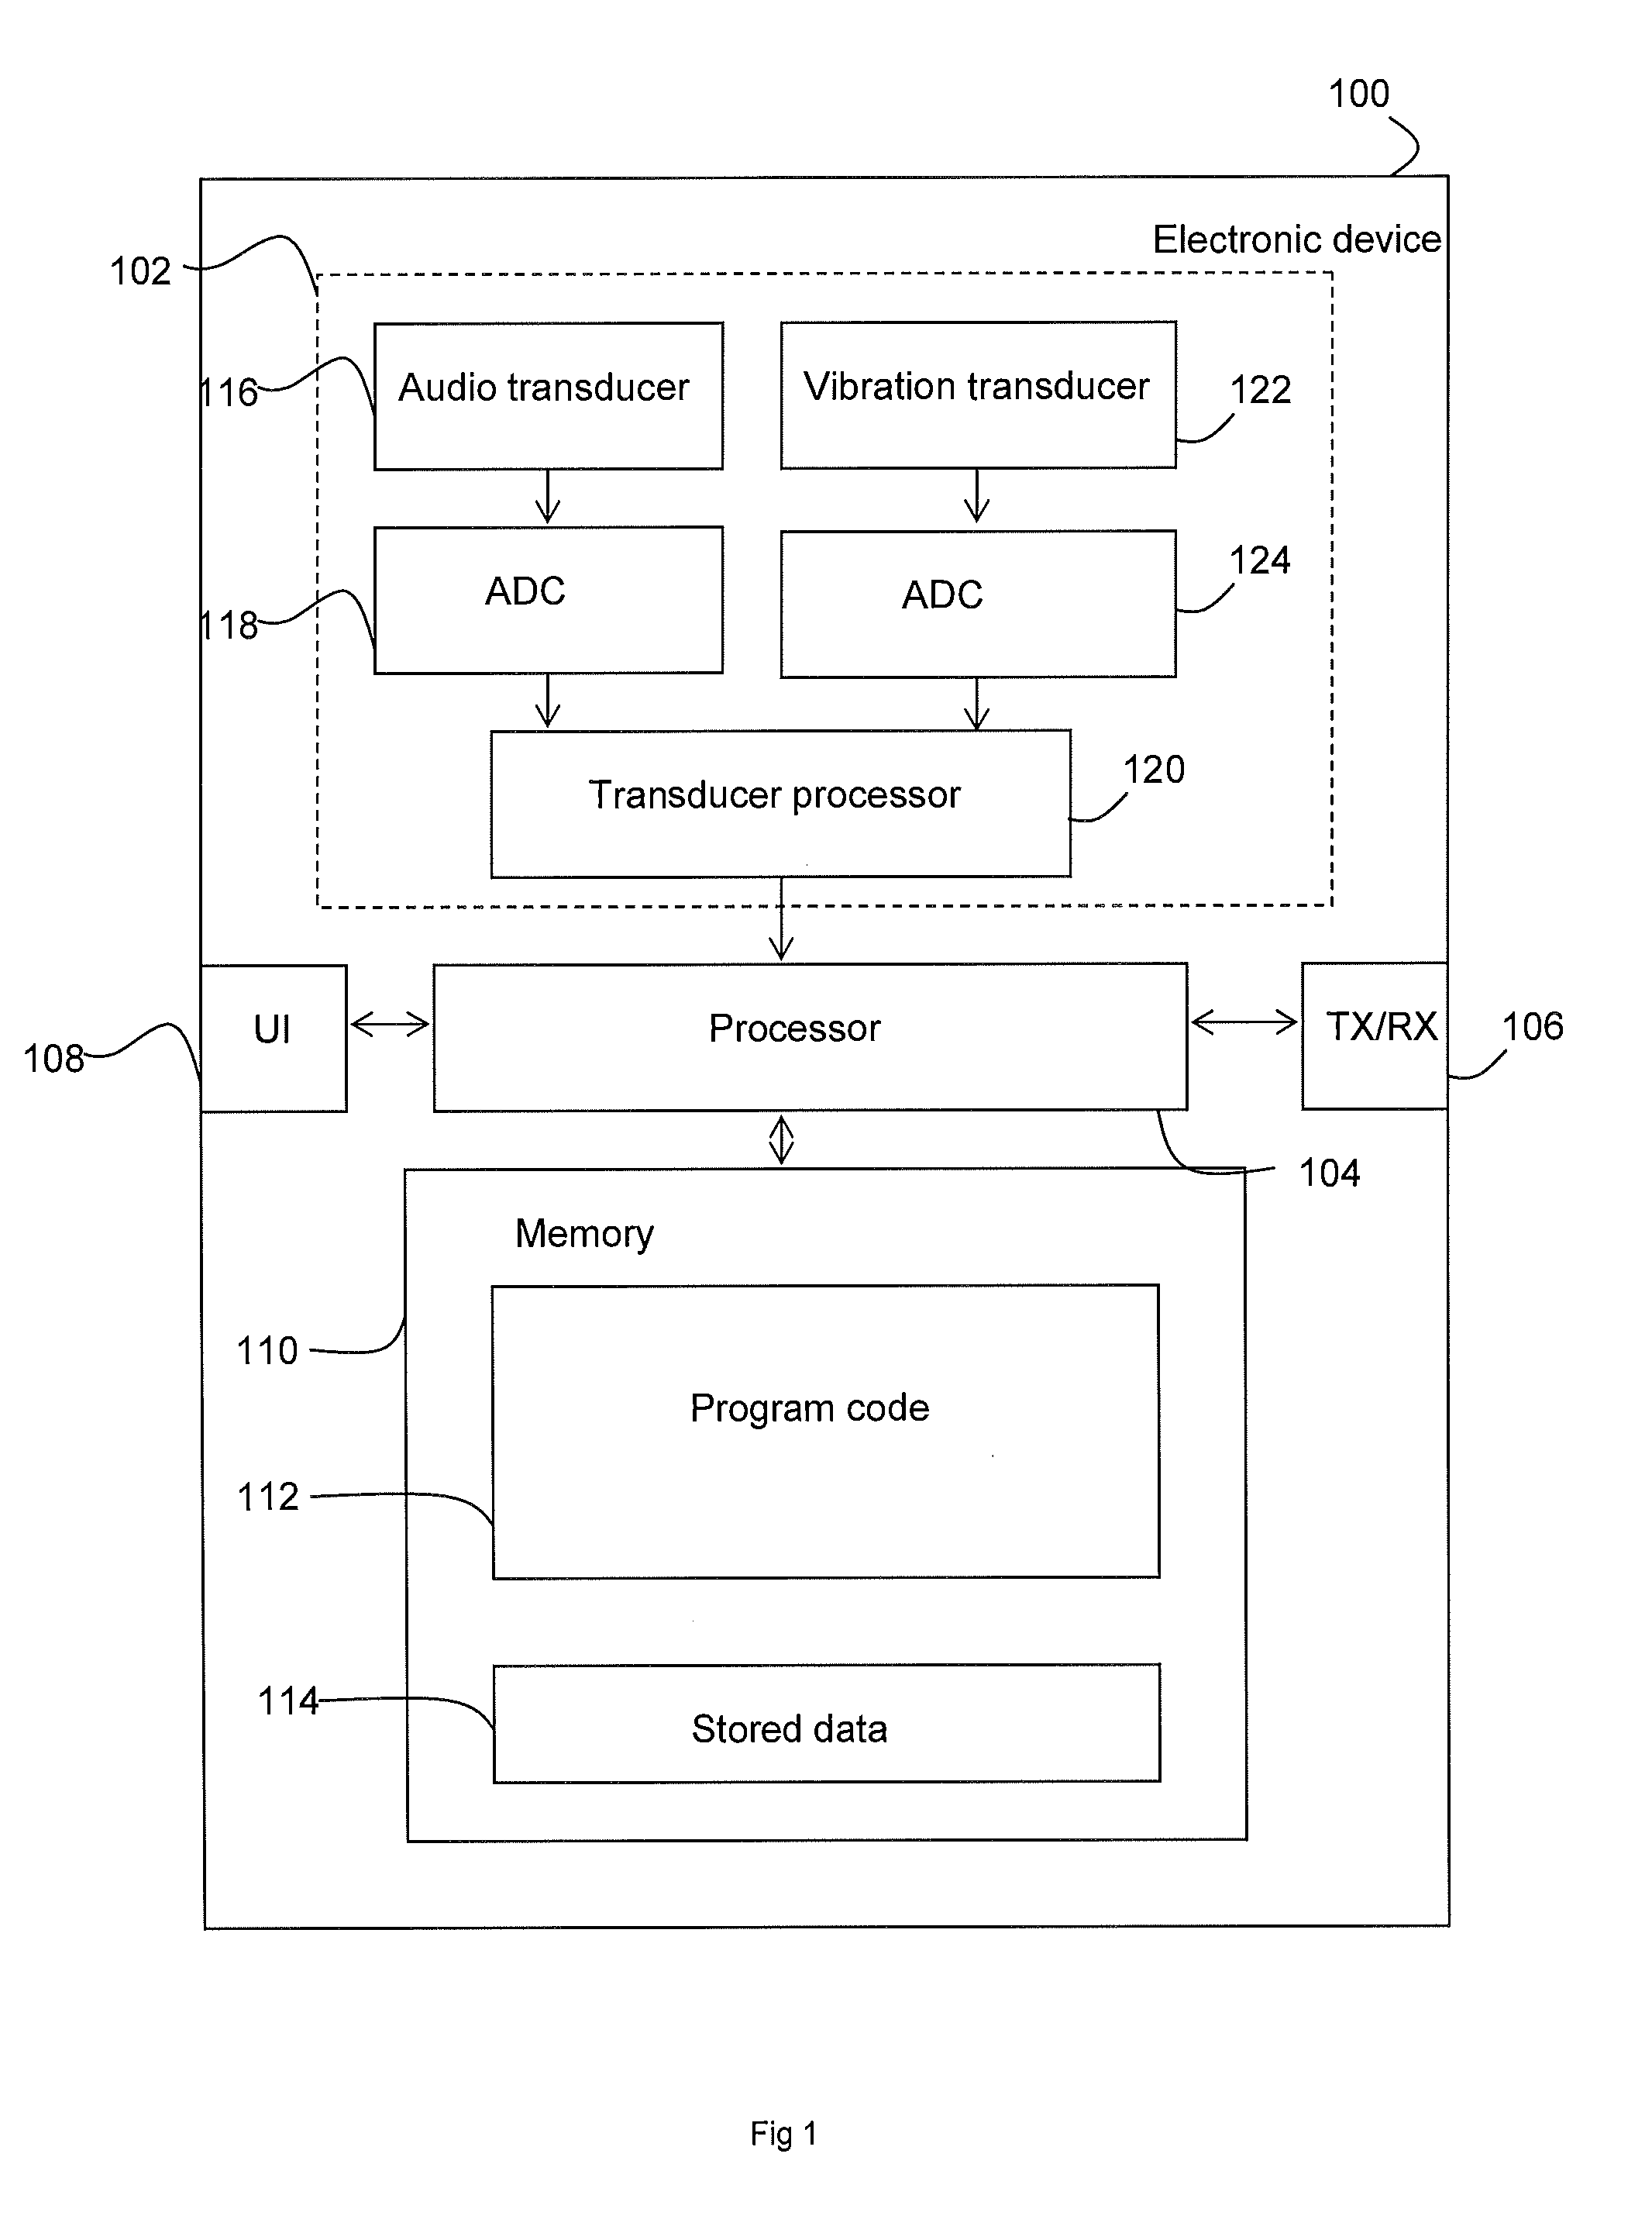 Microphone apparatus and method for removing unwanted sounds